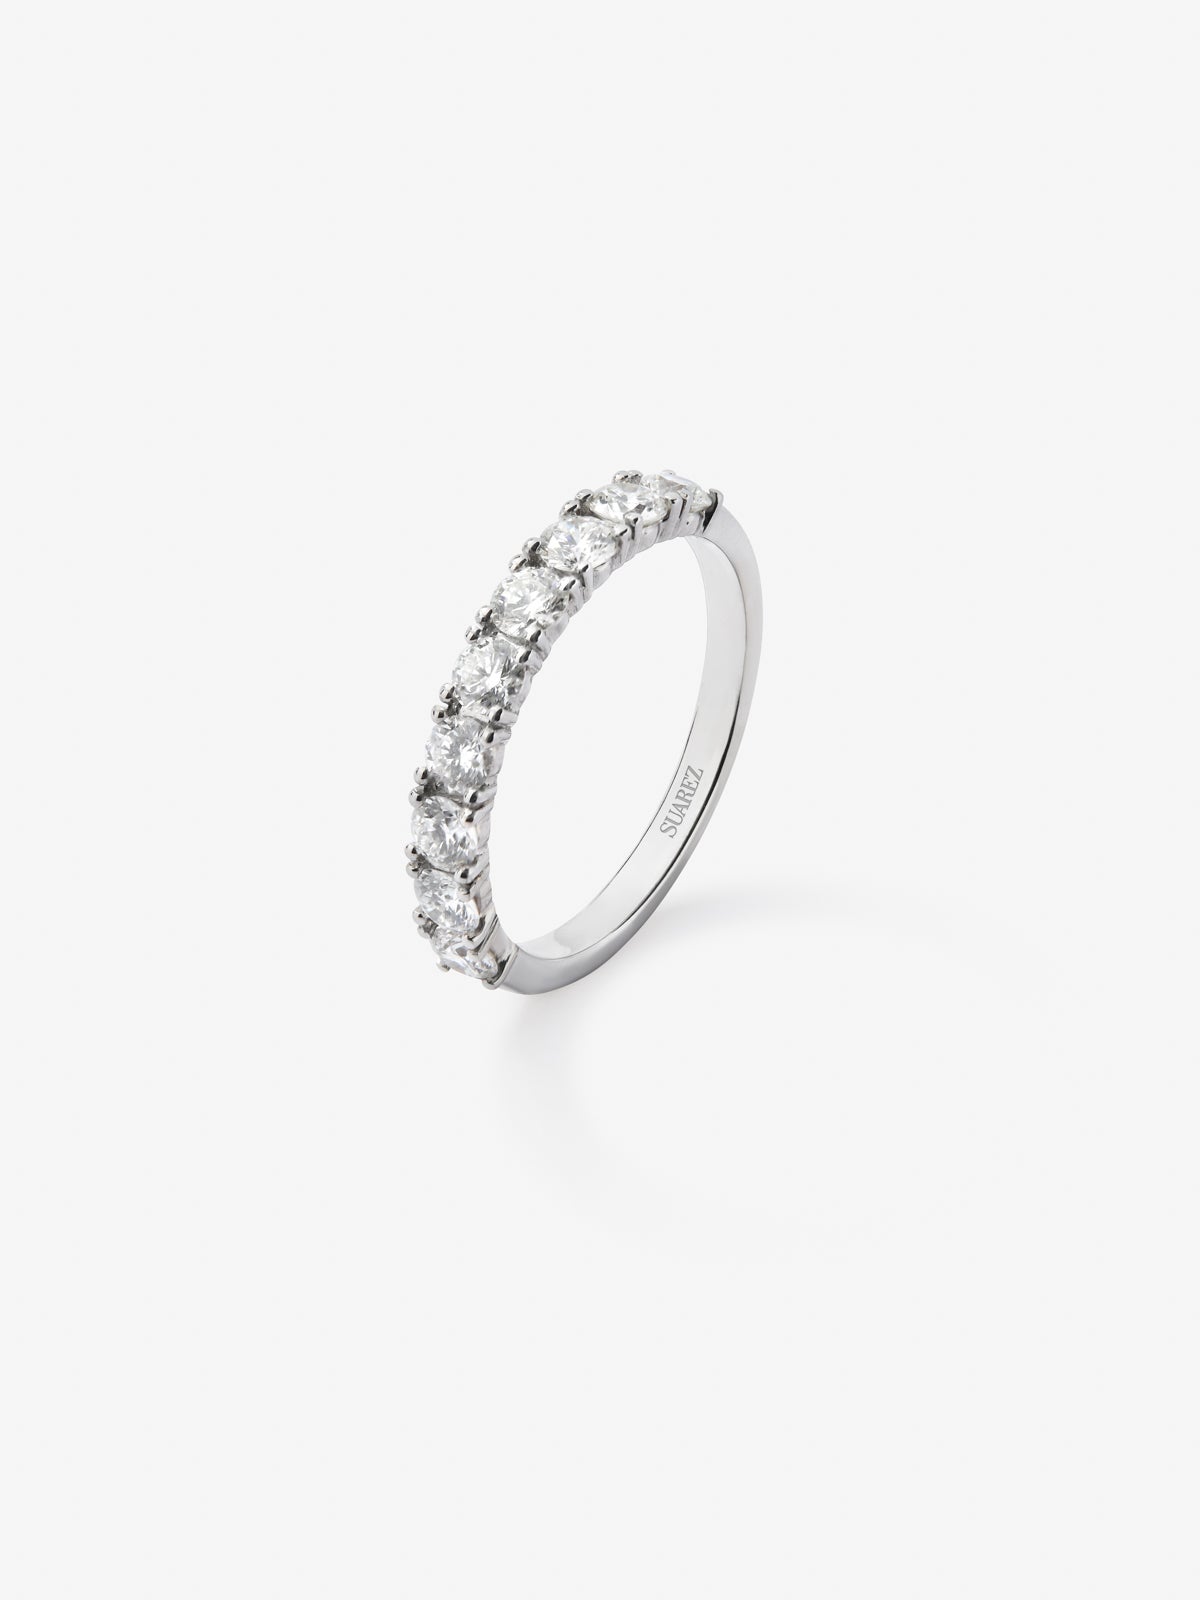 Half ring in 18K white gold with 9 brilliant-cut diamonds with a total of 1.36 cts